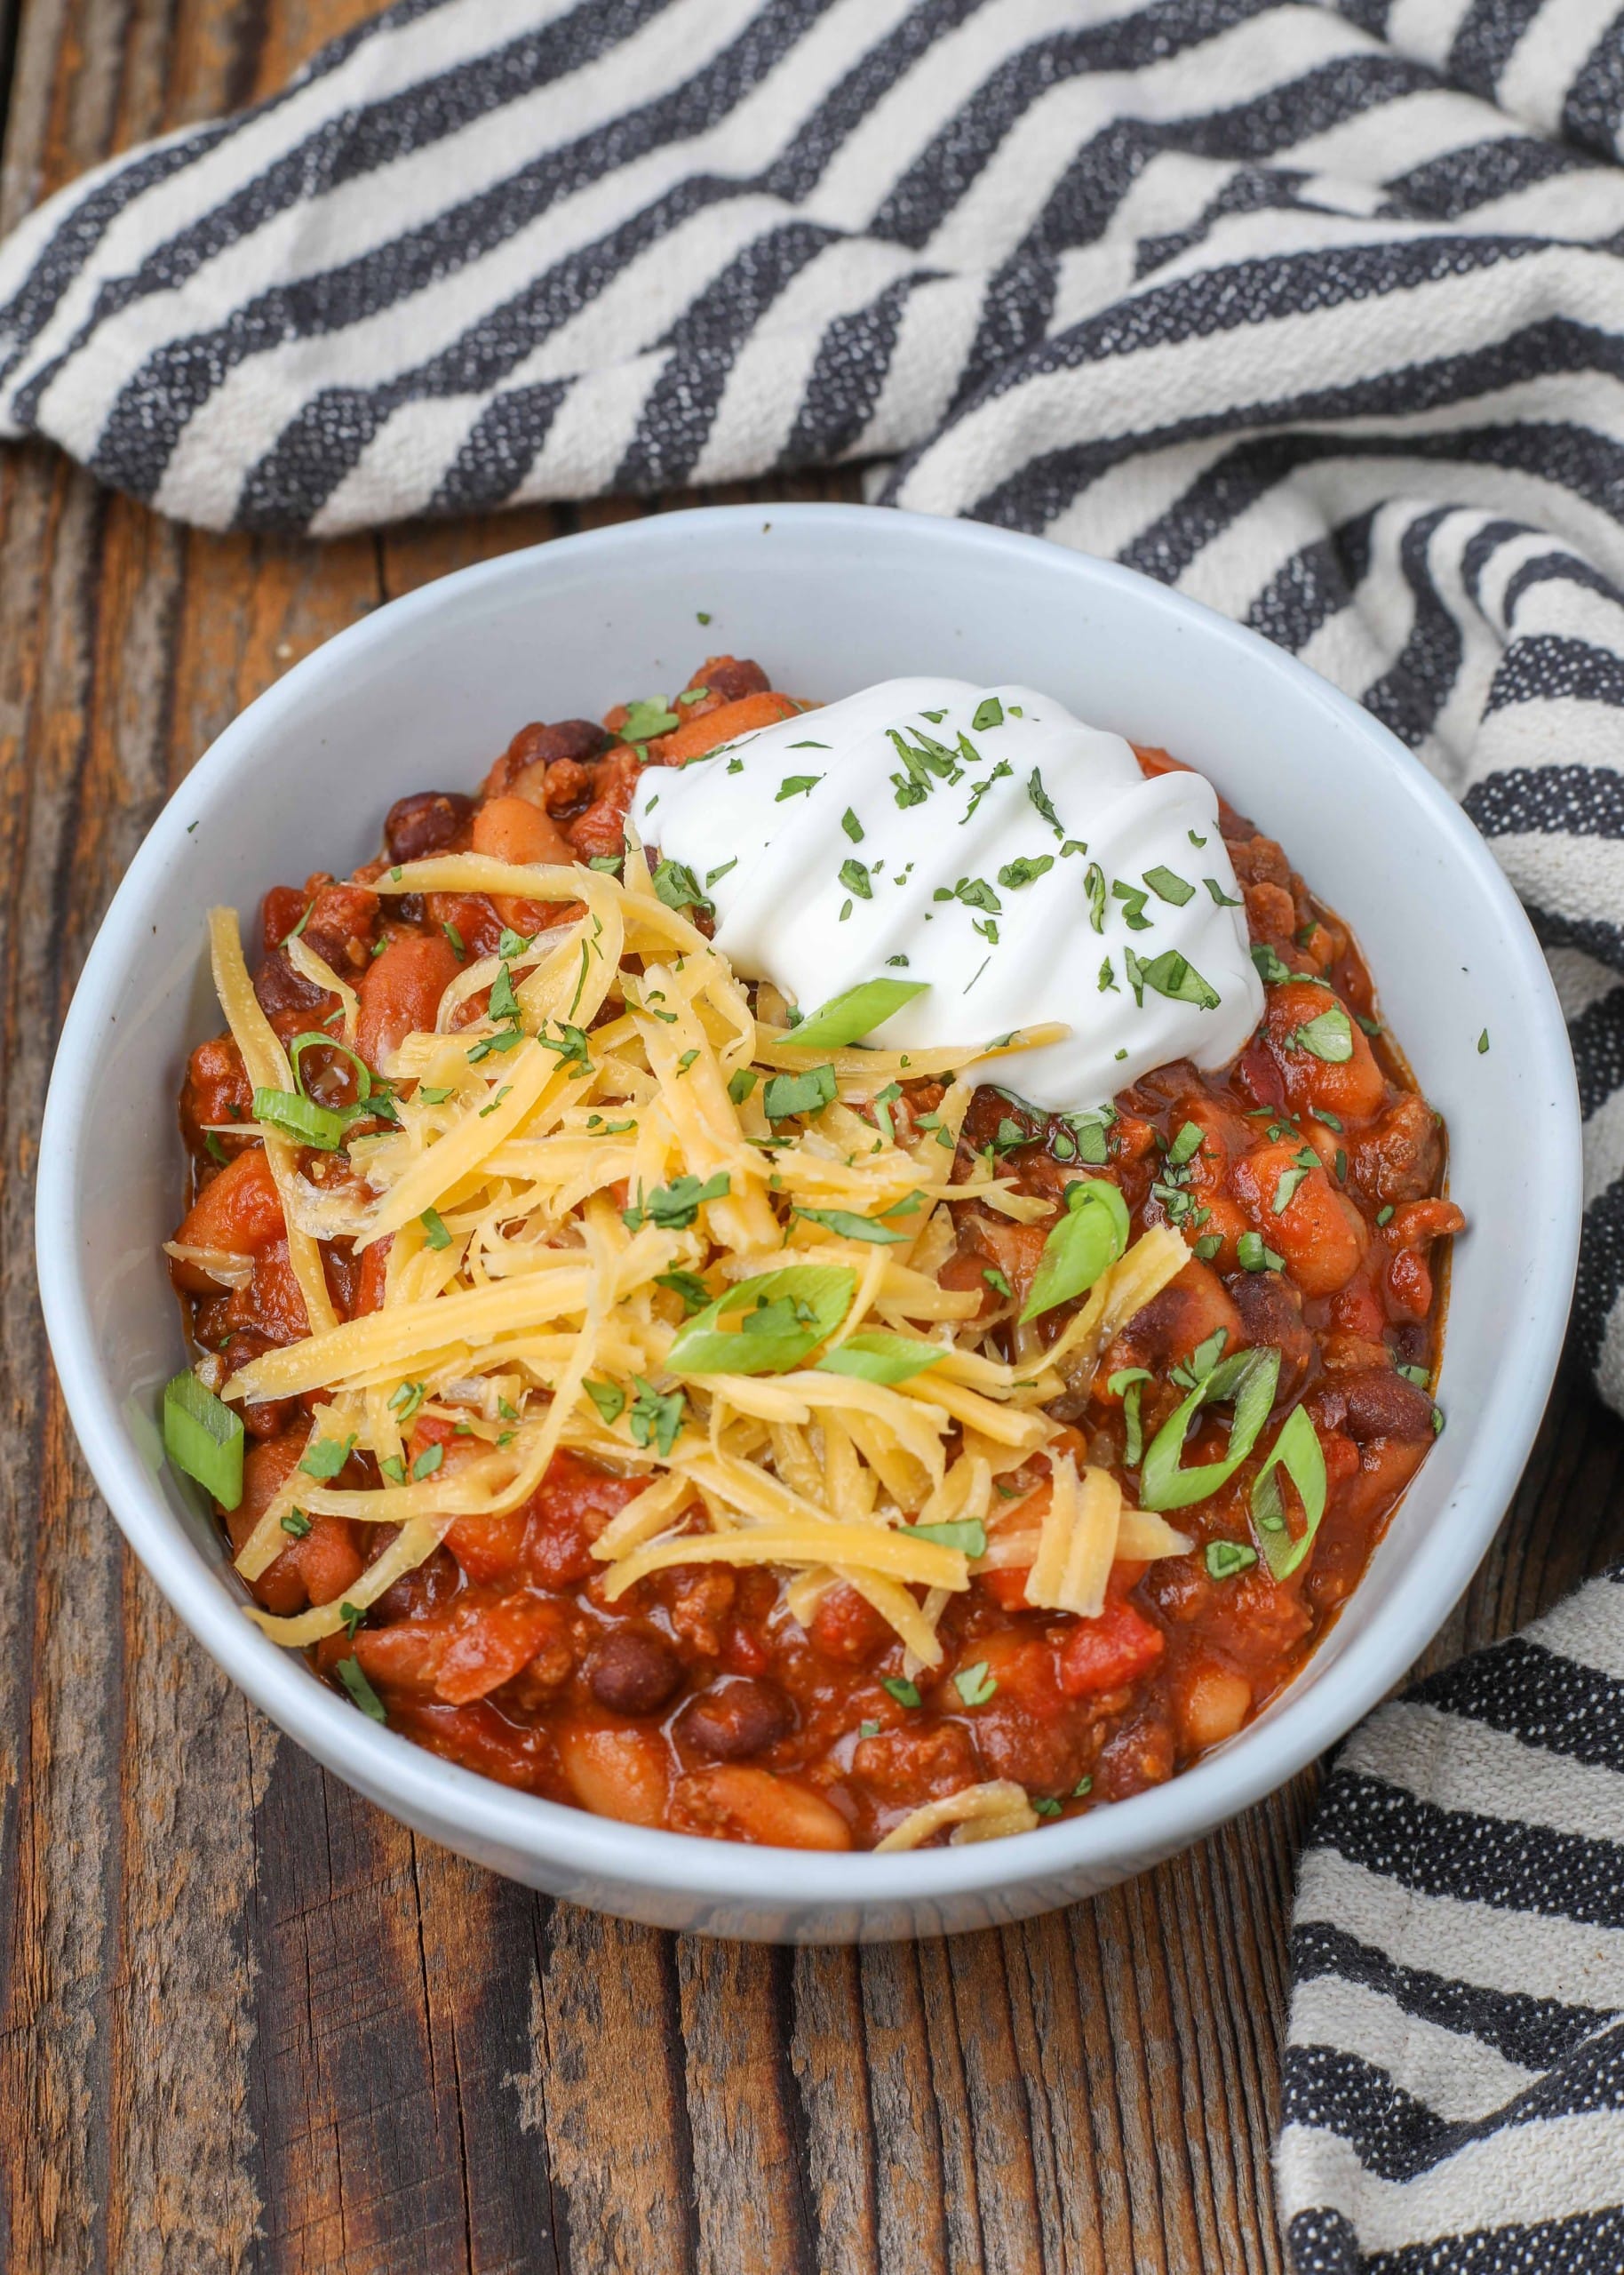 https://chocolatewithgrace.com/wp-content/uploads/2022/07/Three-Bean-Chili-2-1-of-1-scaled.jpg